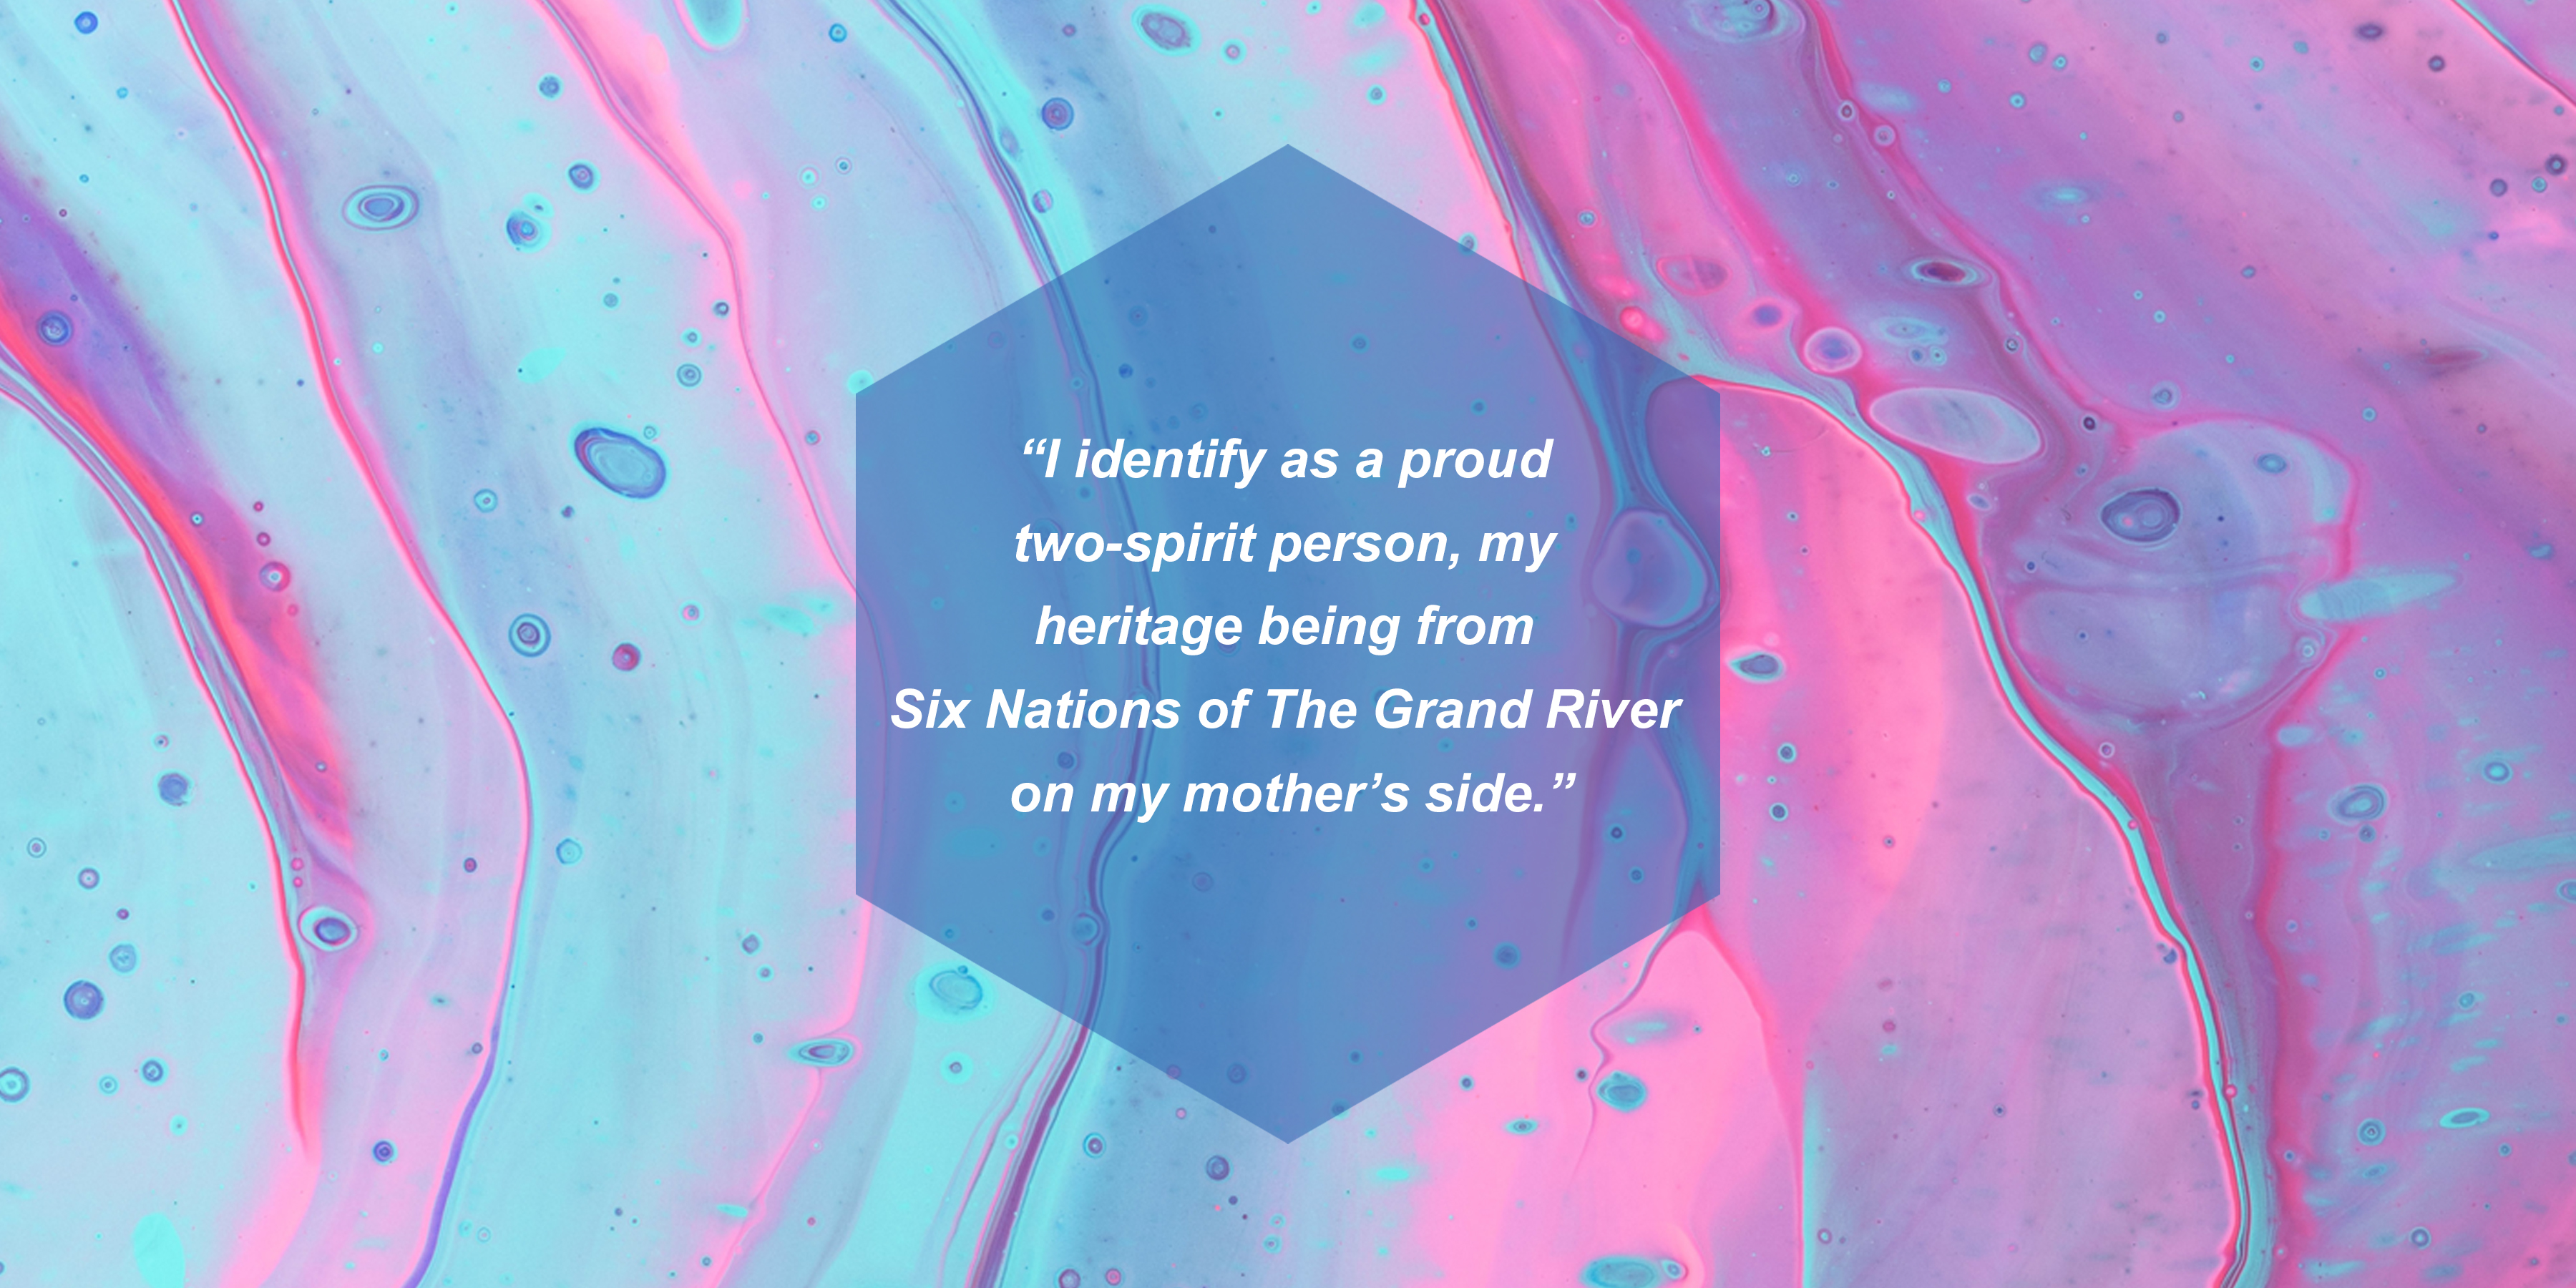 I identify as a proud two-spirit person, my heritage being from Six Nations of The Grand River on my mother’s side.